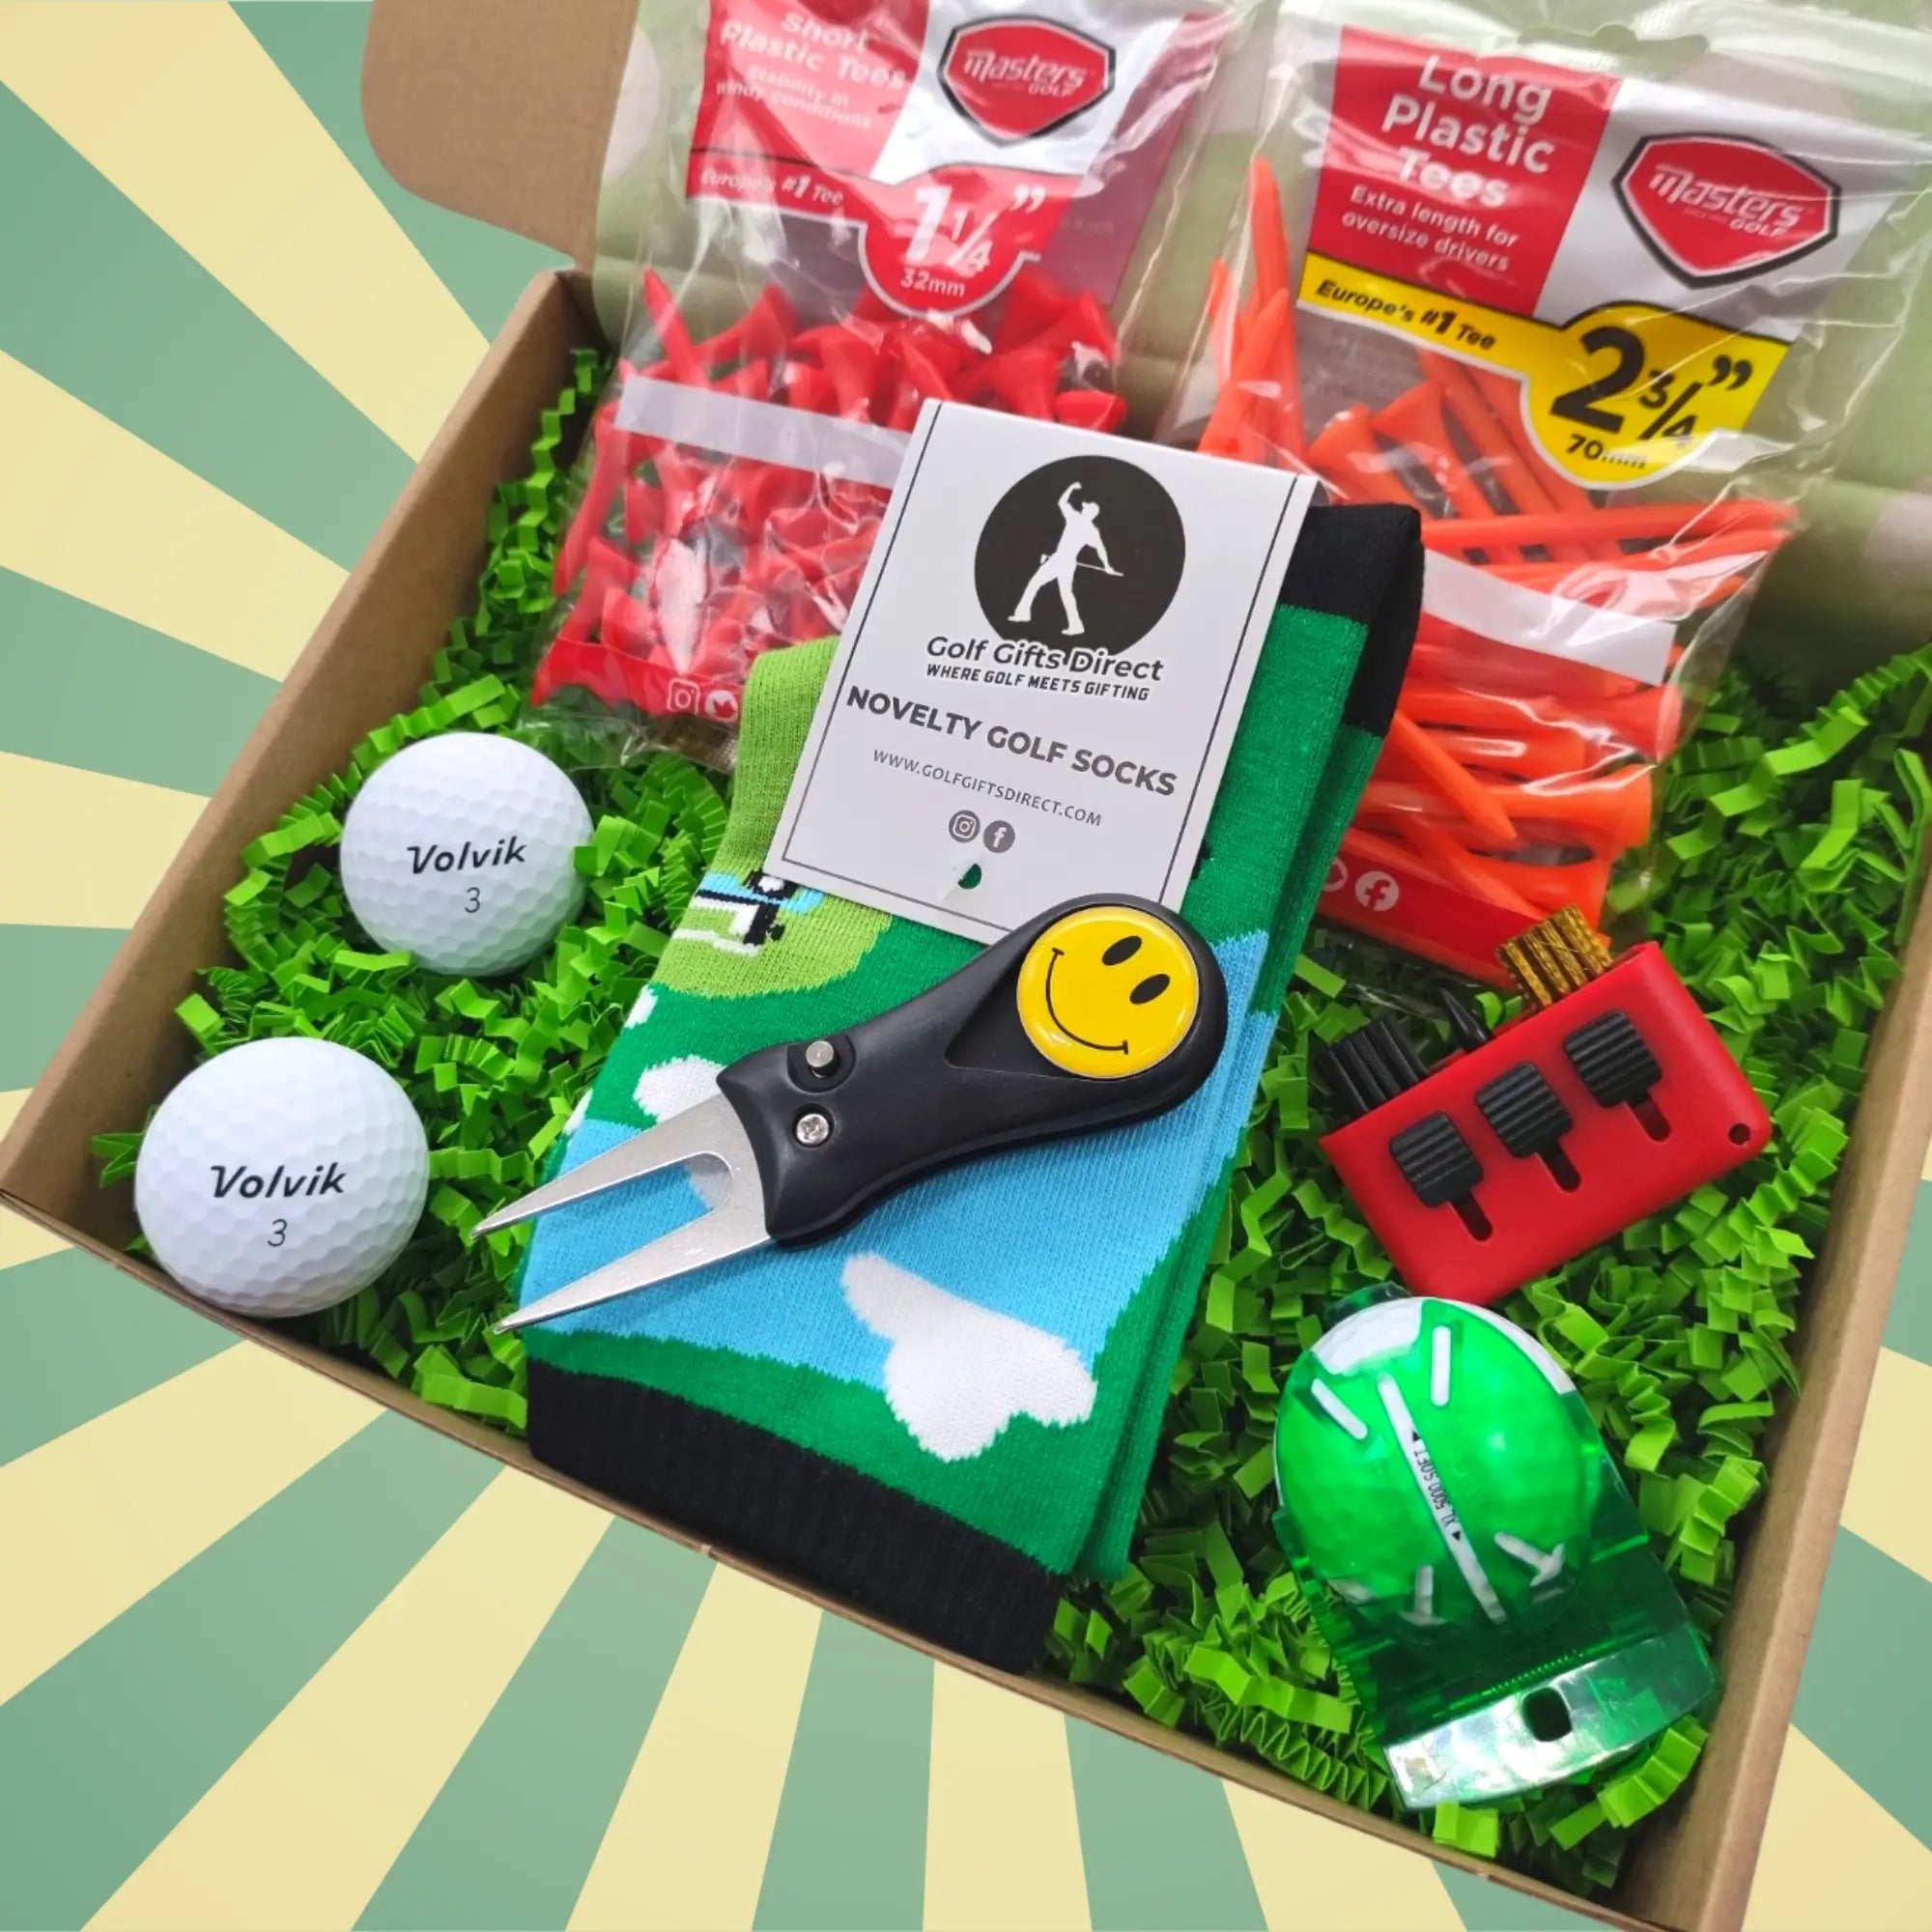 Golf Gifts Direct UK - Golf Gifts for Men and Women Golfers